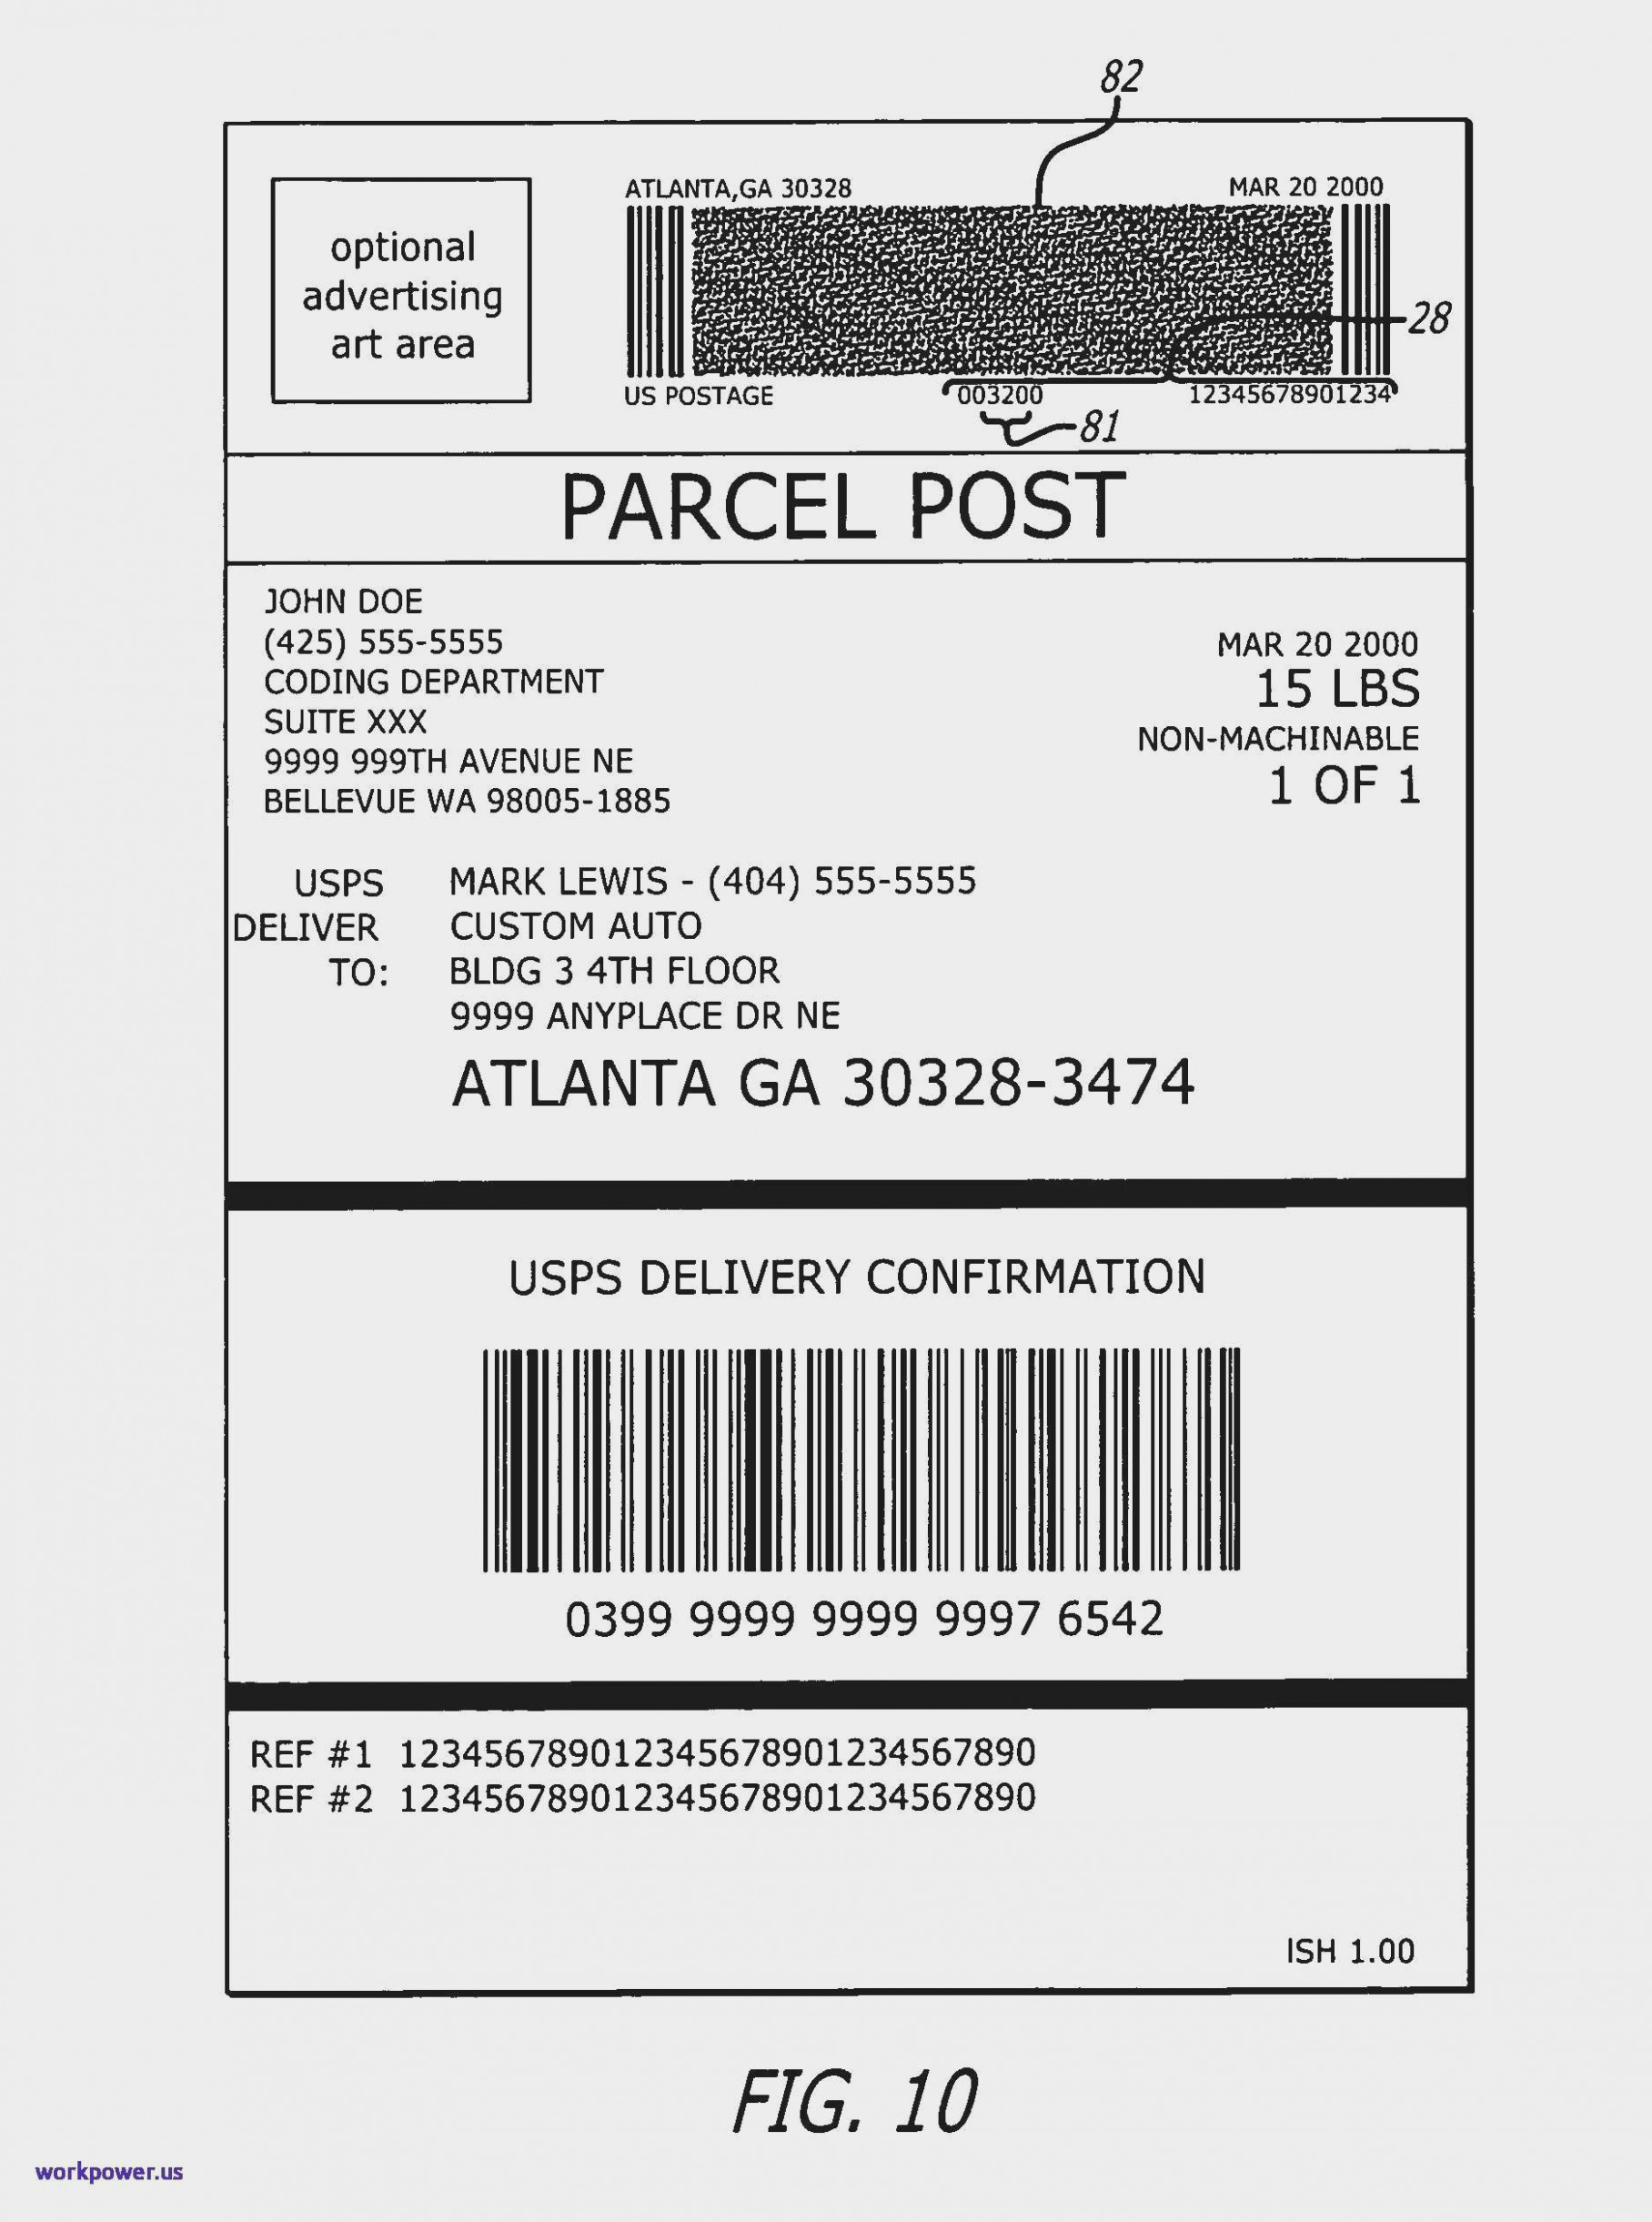 Office Depot Shipping Label Template - Trovoadasonhos Pertaining To Officemax Label Template